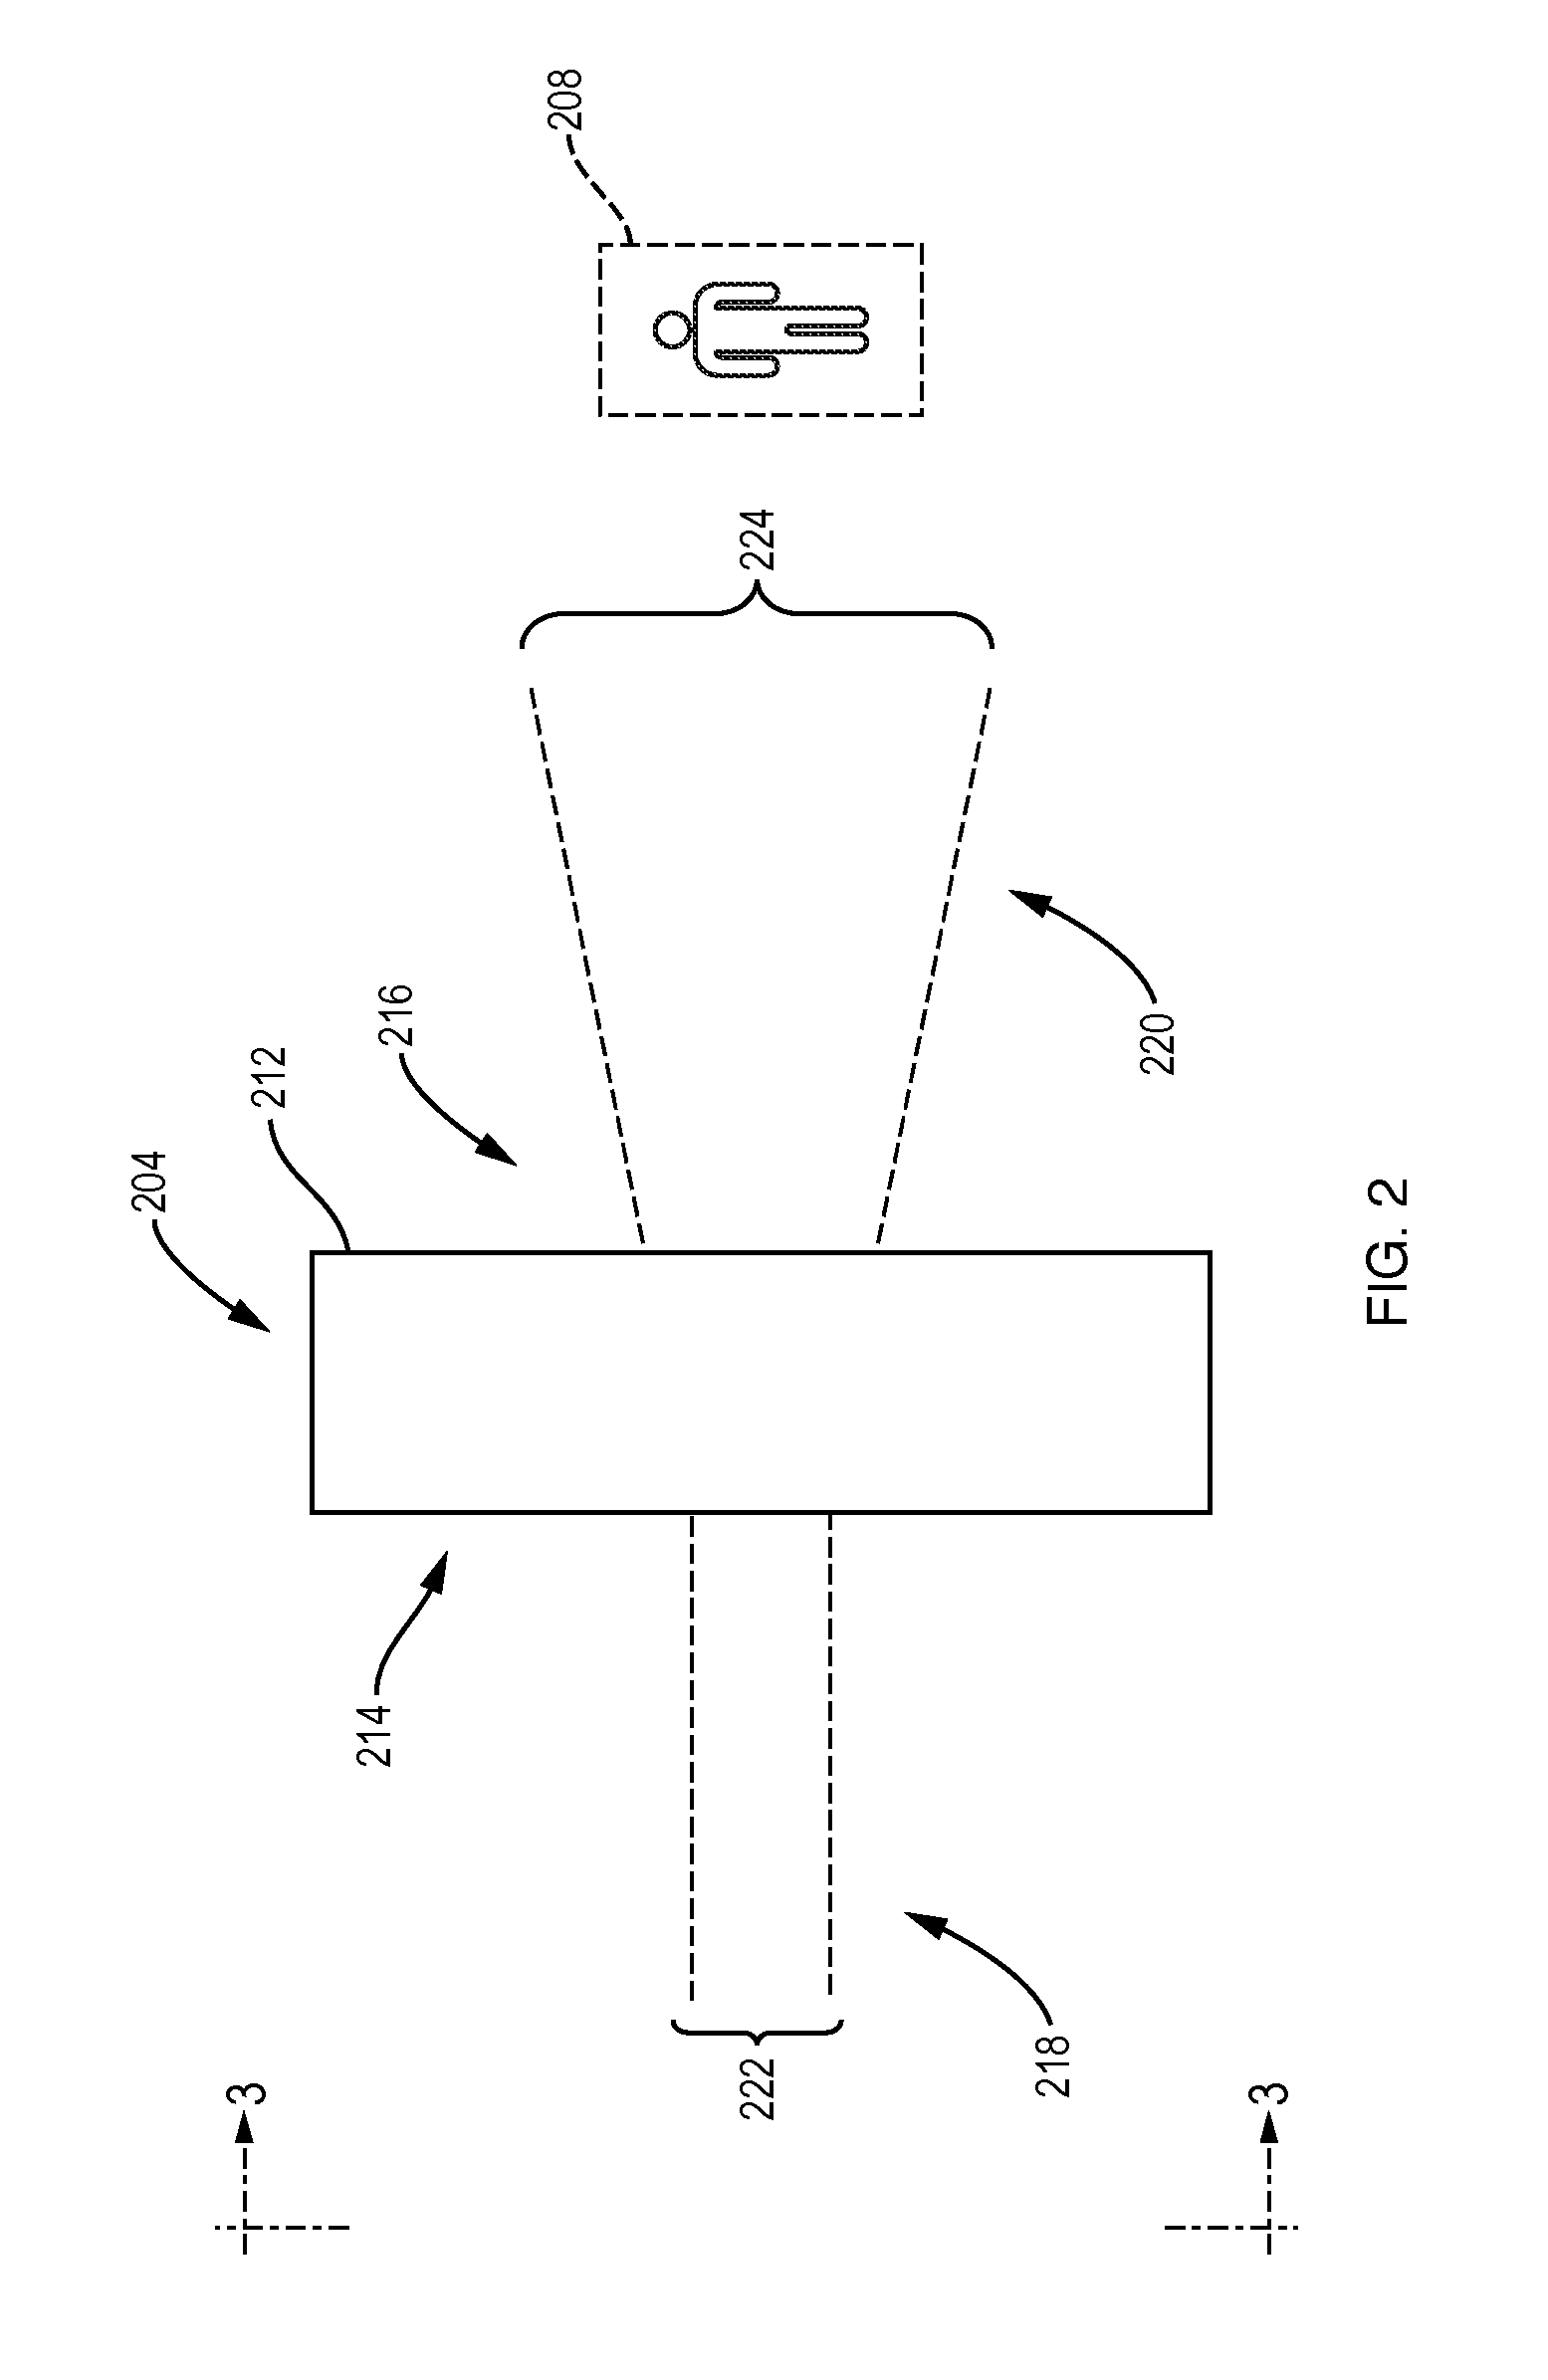 Device for personal heating using a directed energy beam